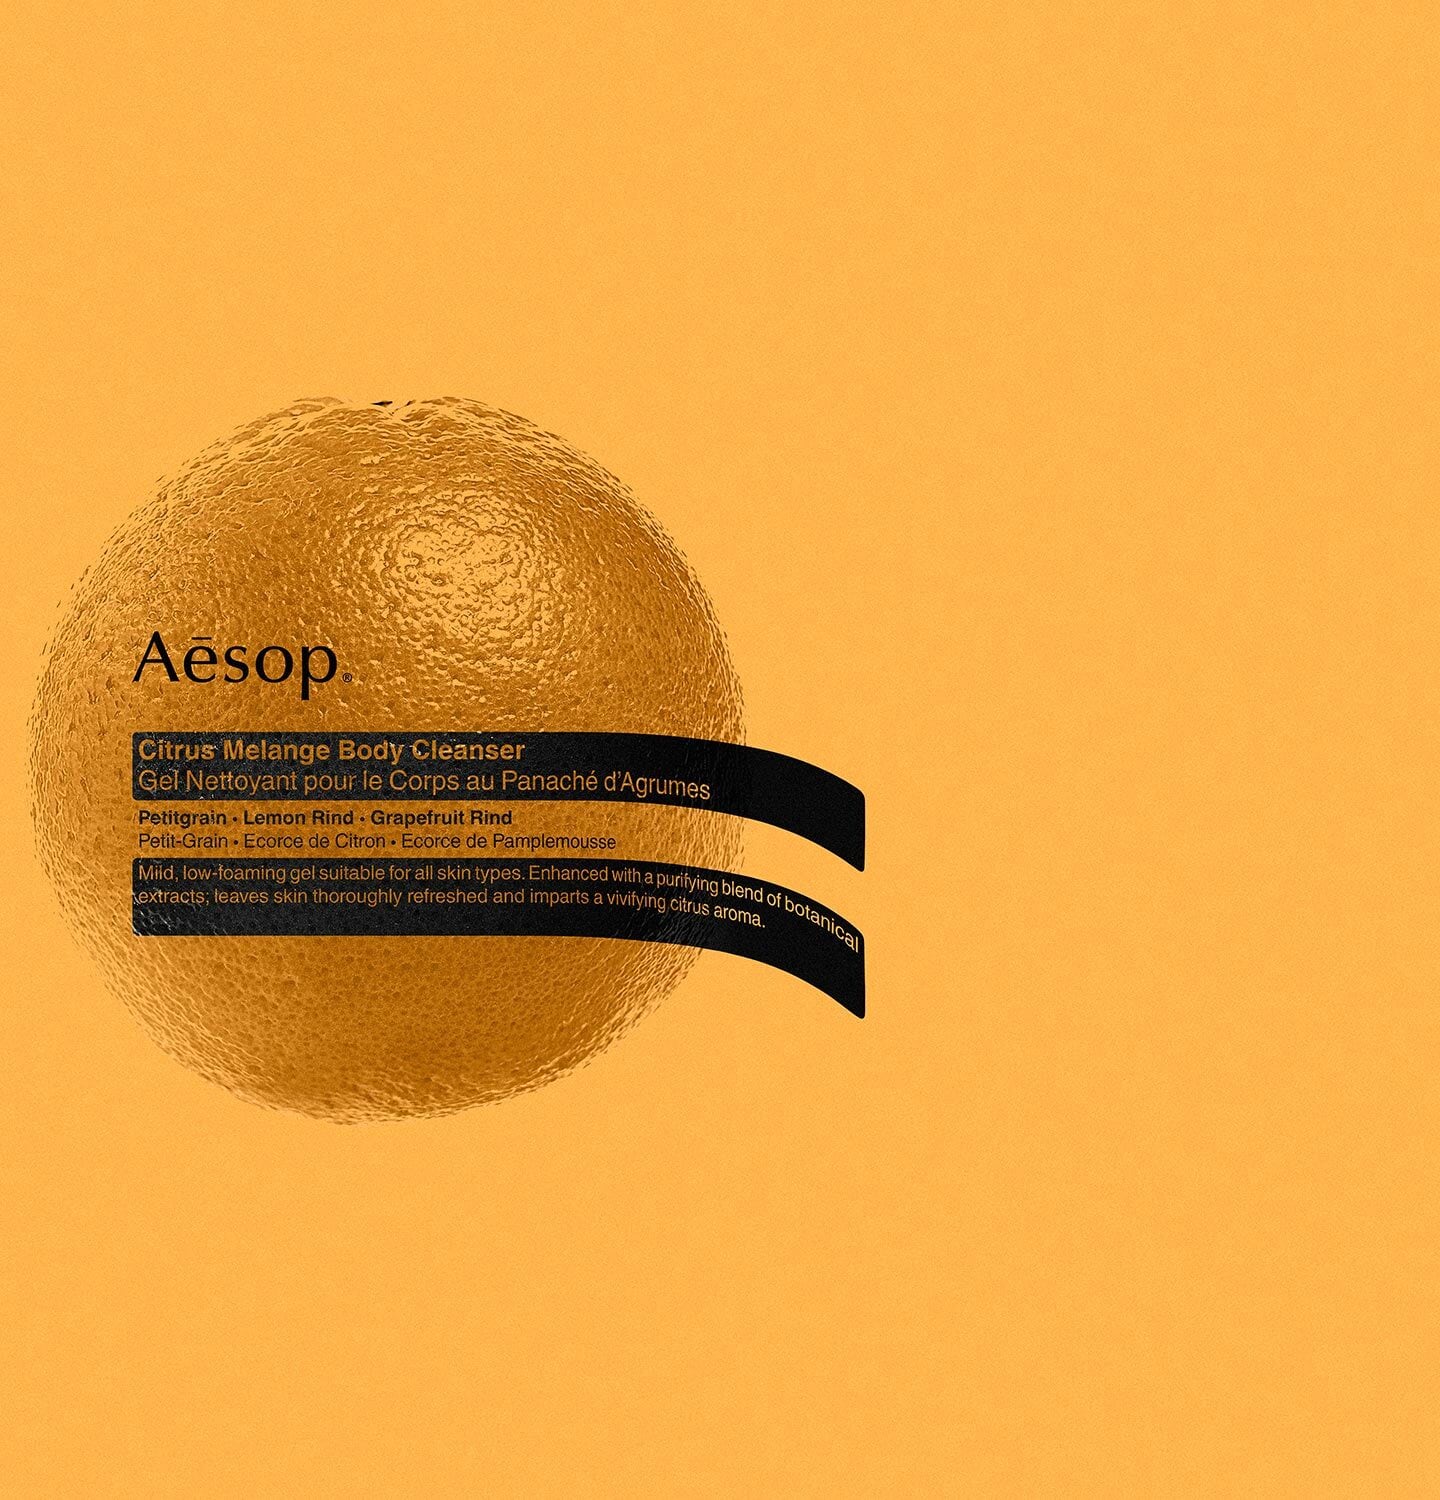 Picture of orange fruit on orange background with aesop label over it